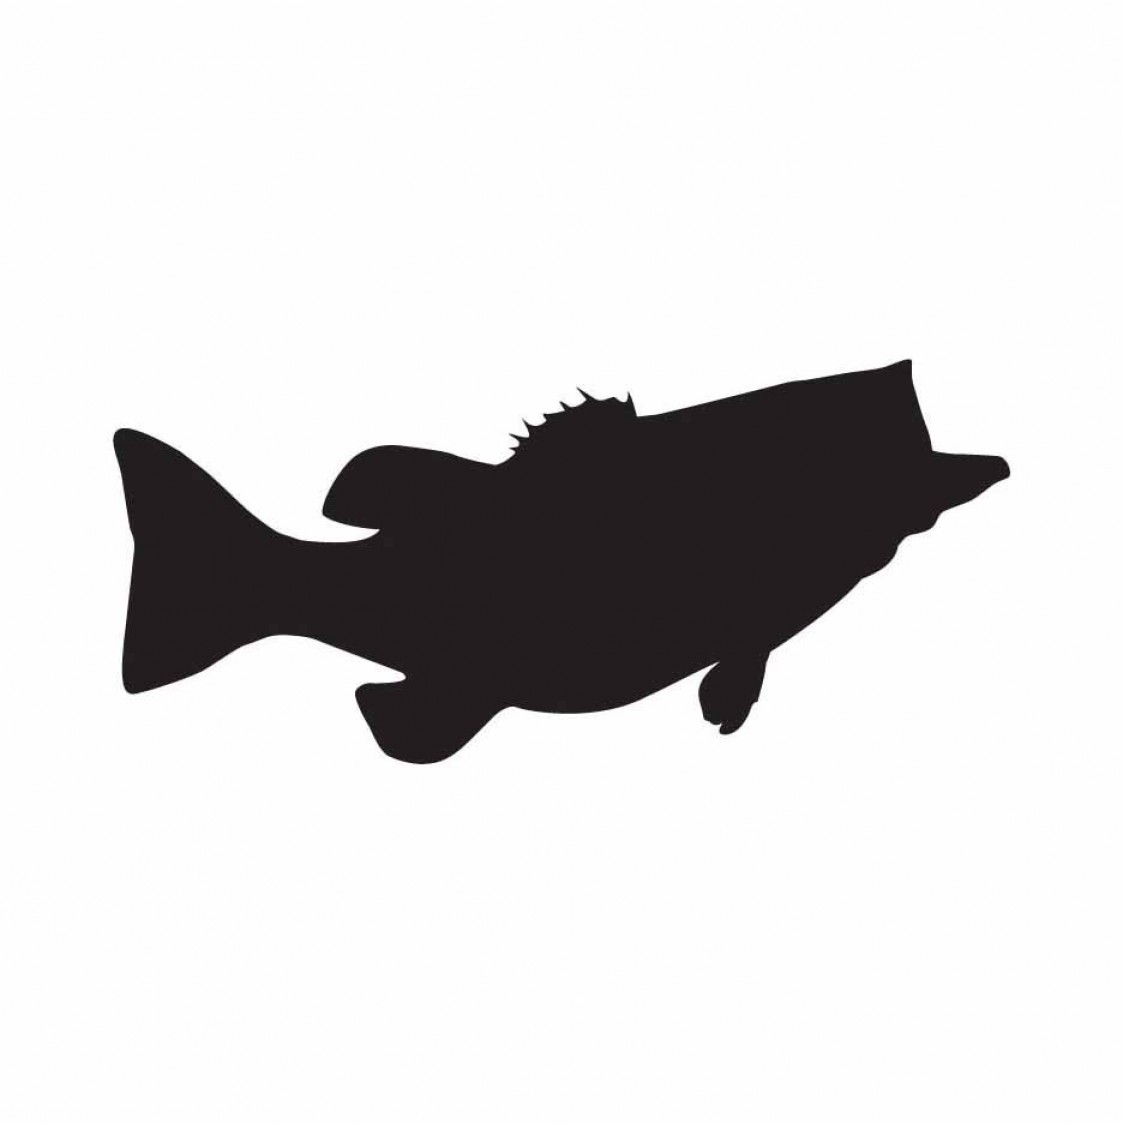 Download Bass Silhouette Vector at Vectorified.com | Collection of Bass Silhouette Vector free for ...